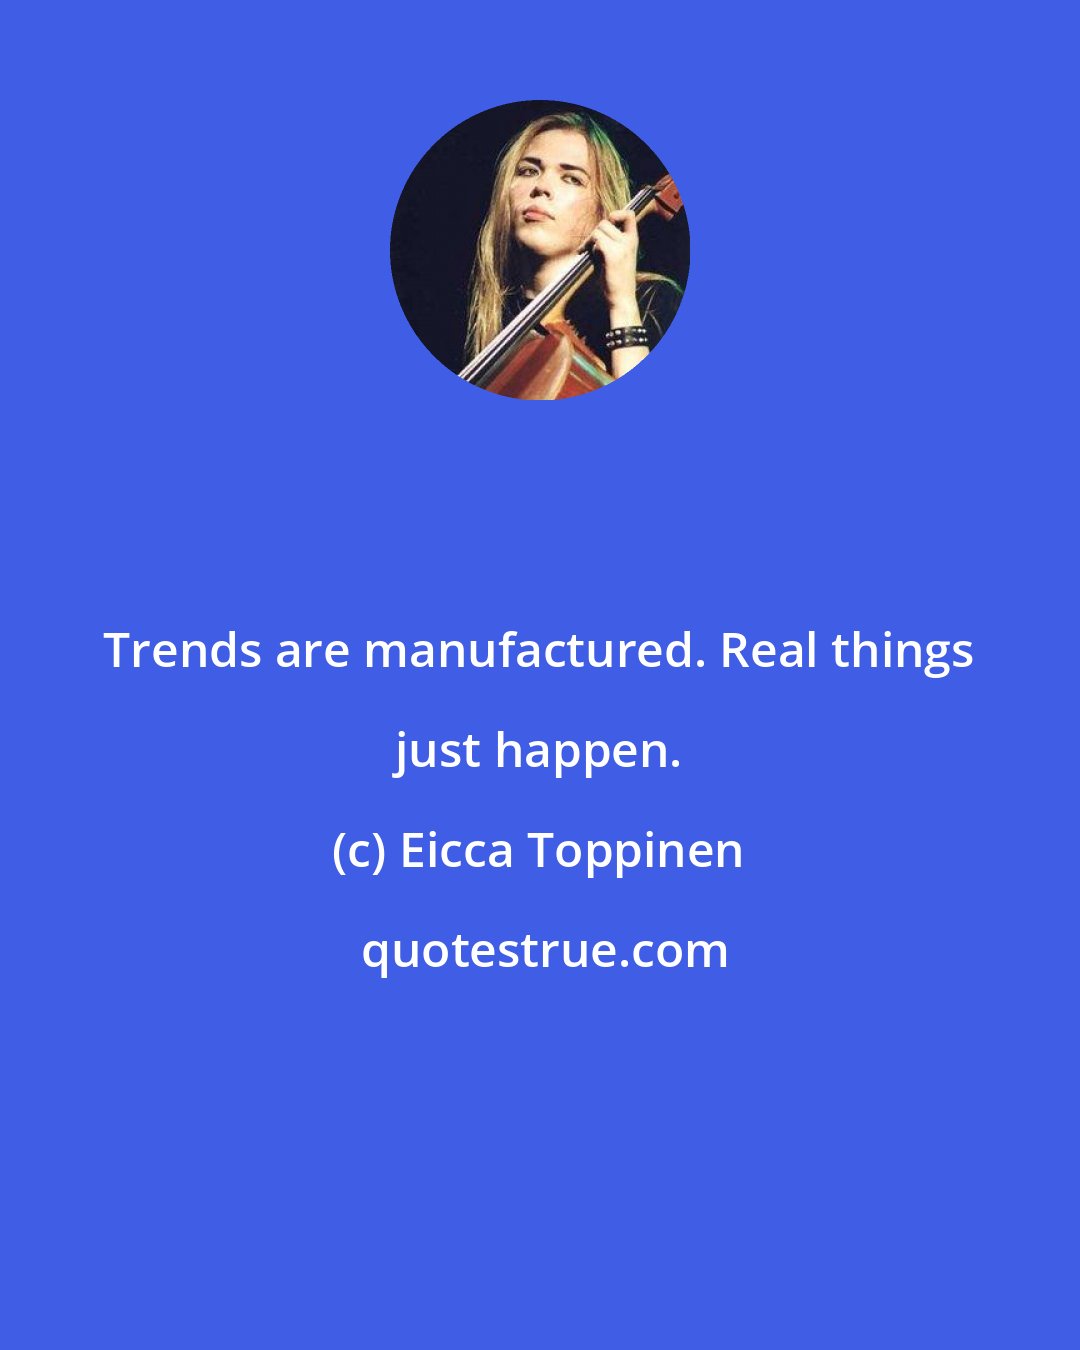 Eicca Toppinen: Trends are manufactured. Real things just happen.